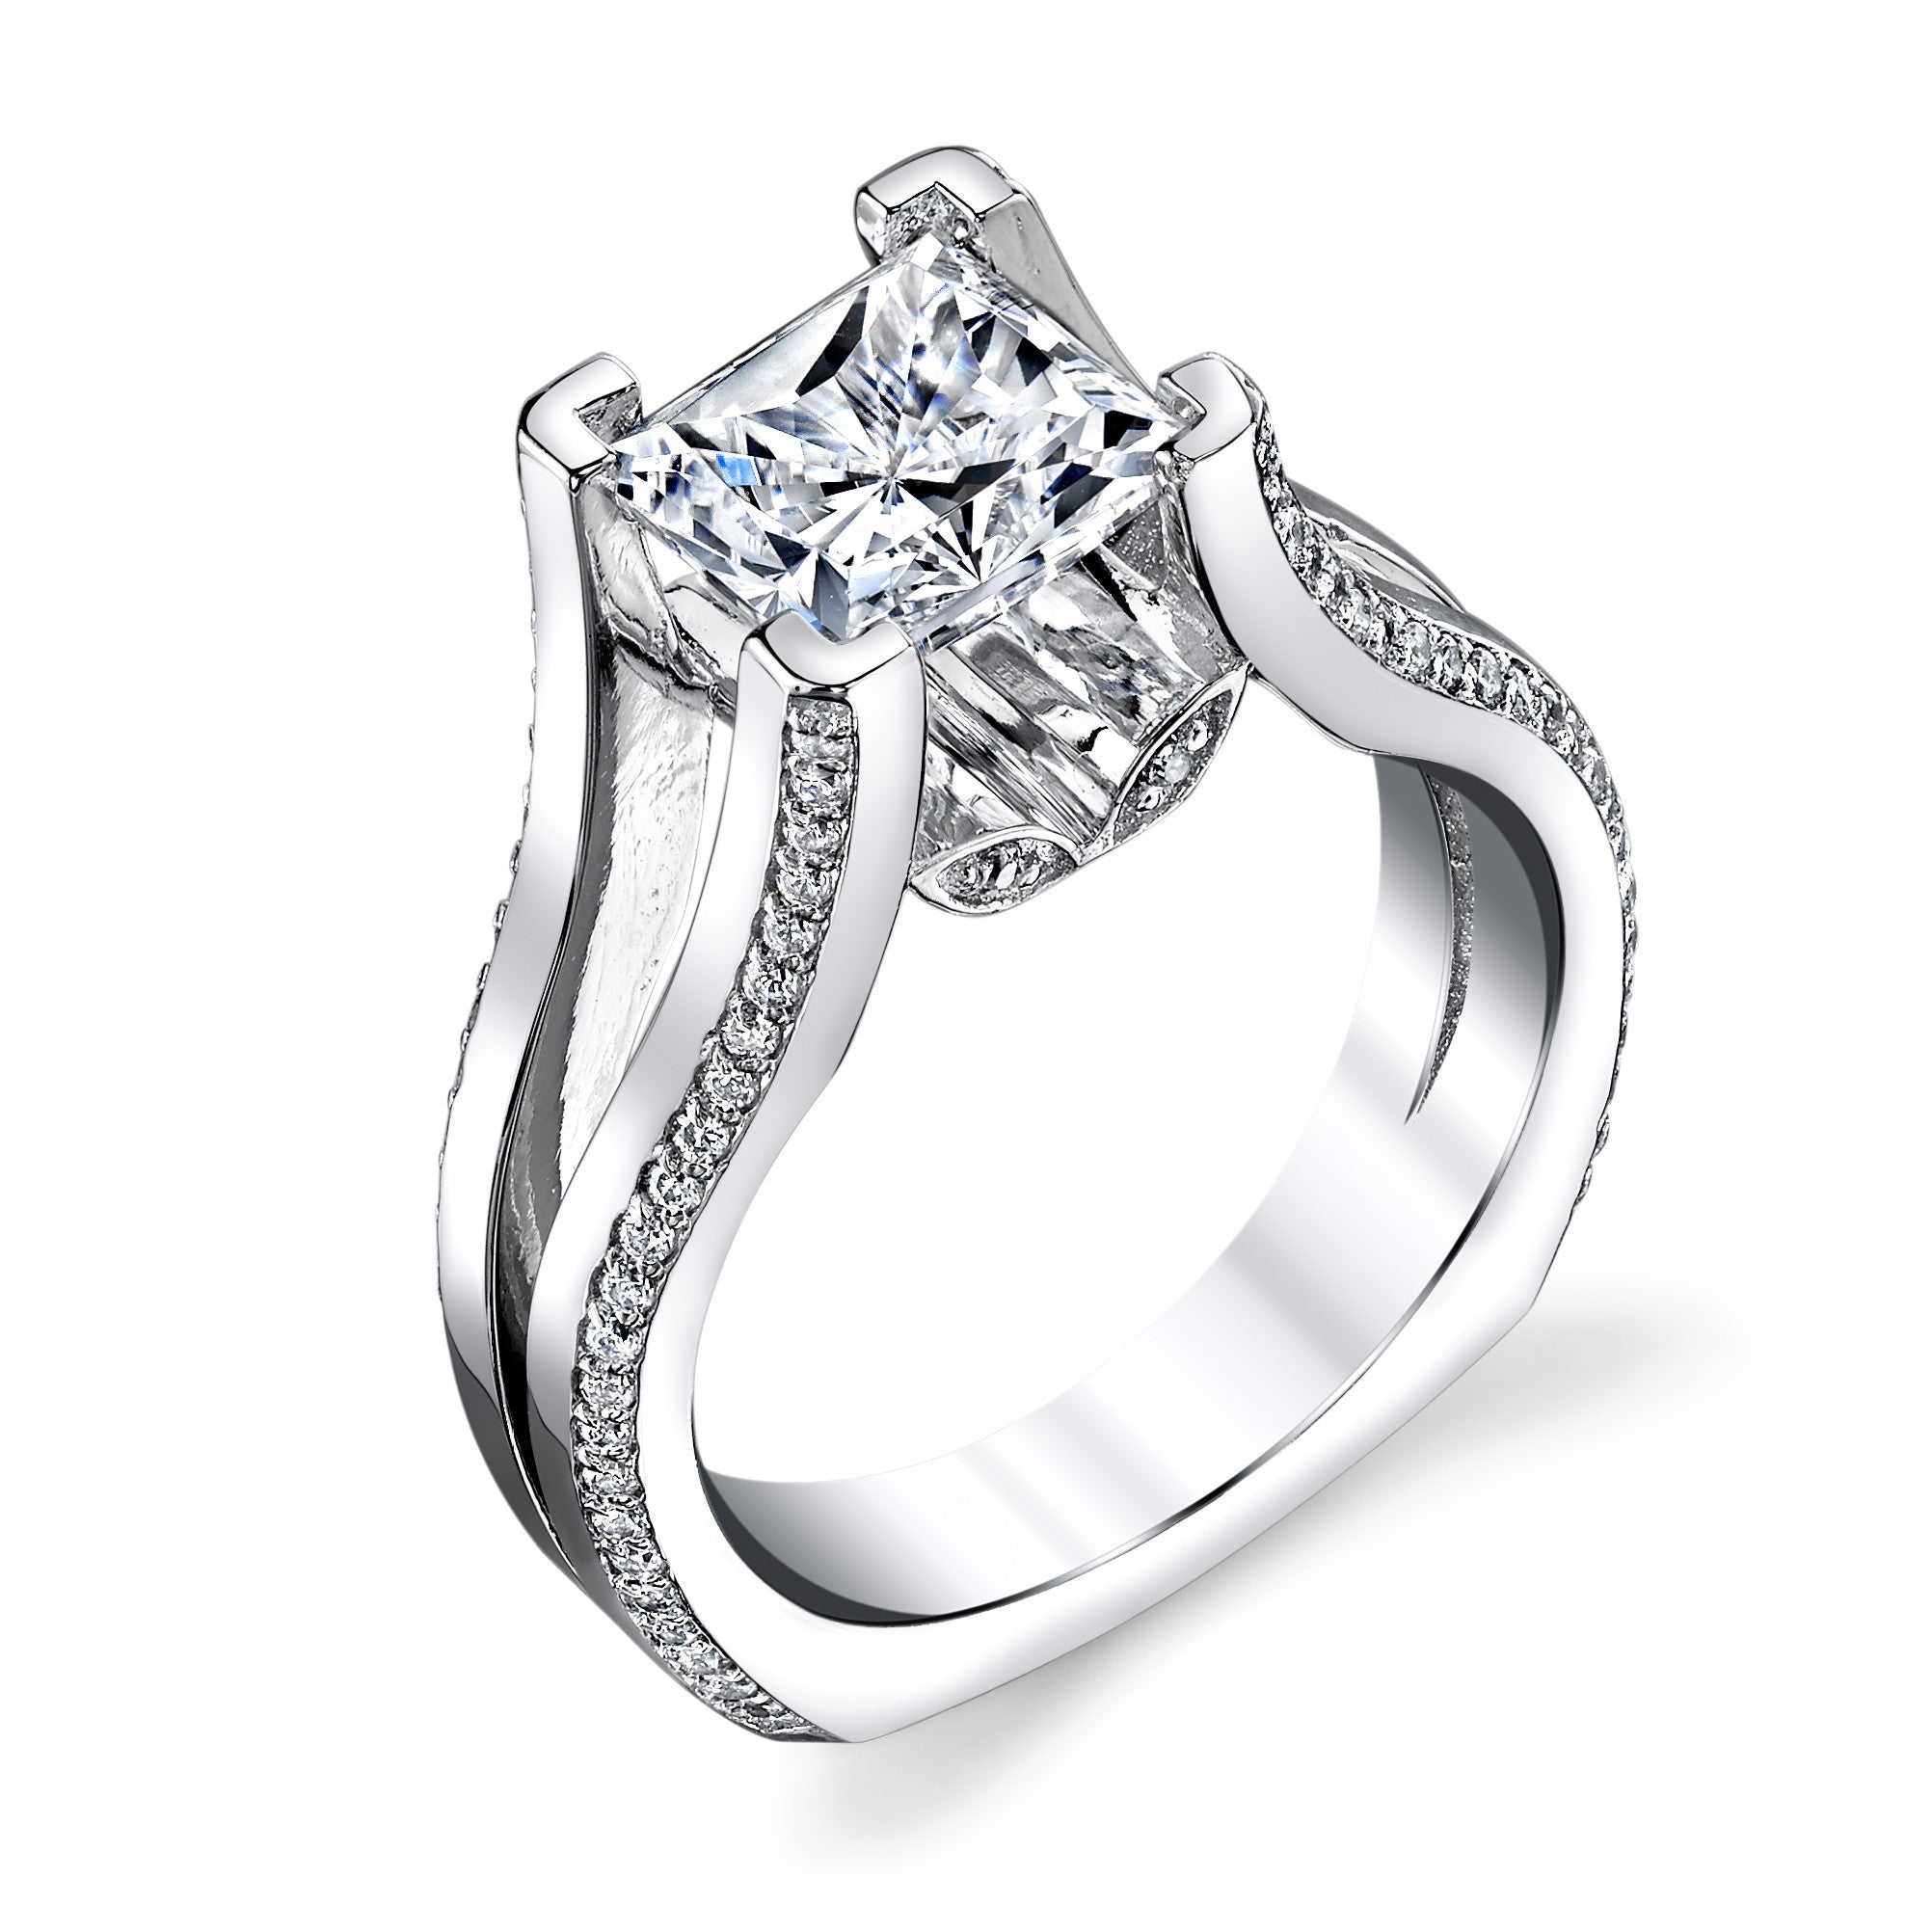 Cubic Zirconia Engagement Ring- The Rebekah (2 Carat Floating Center stone with Euro Style Split Band)